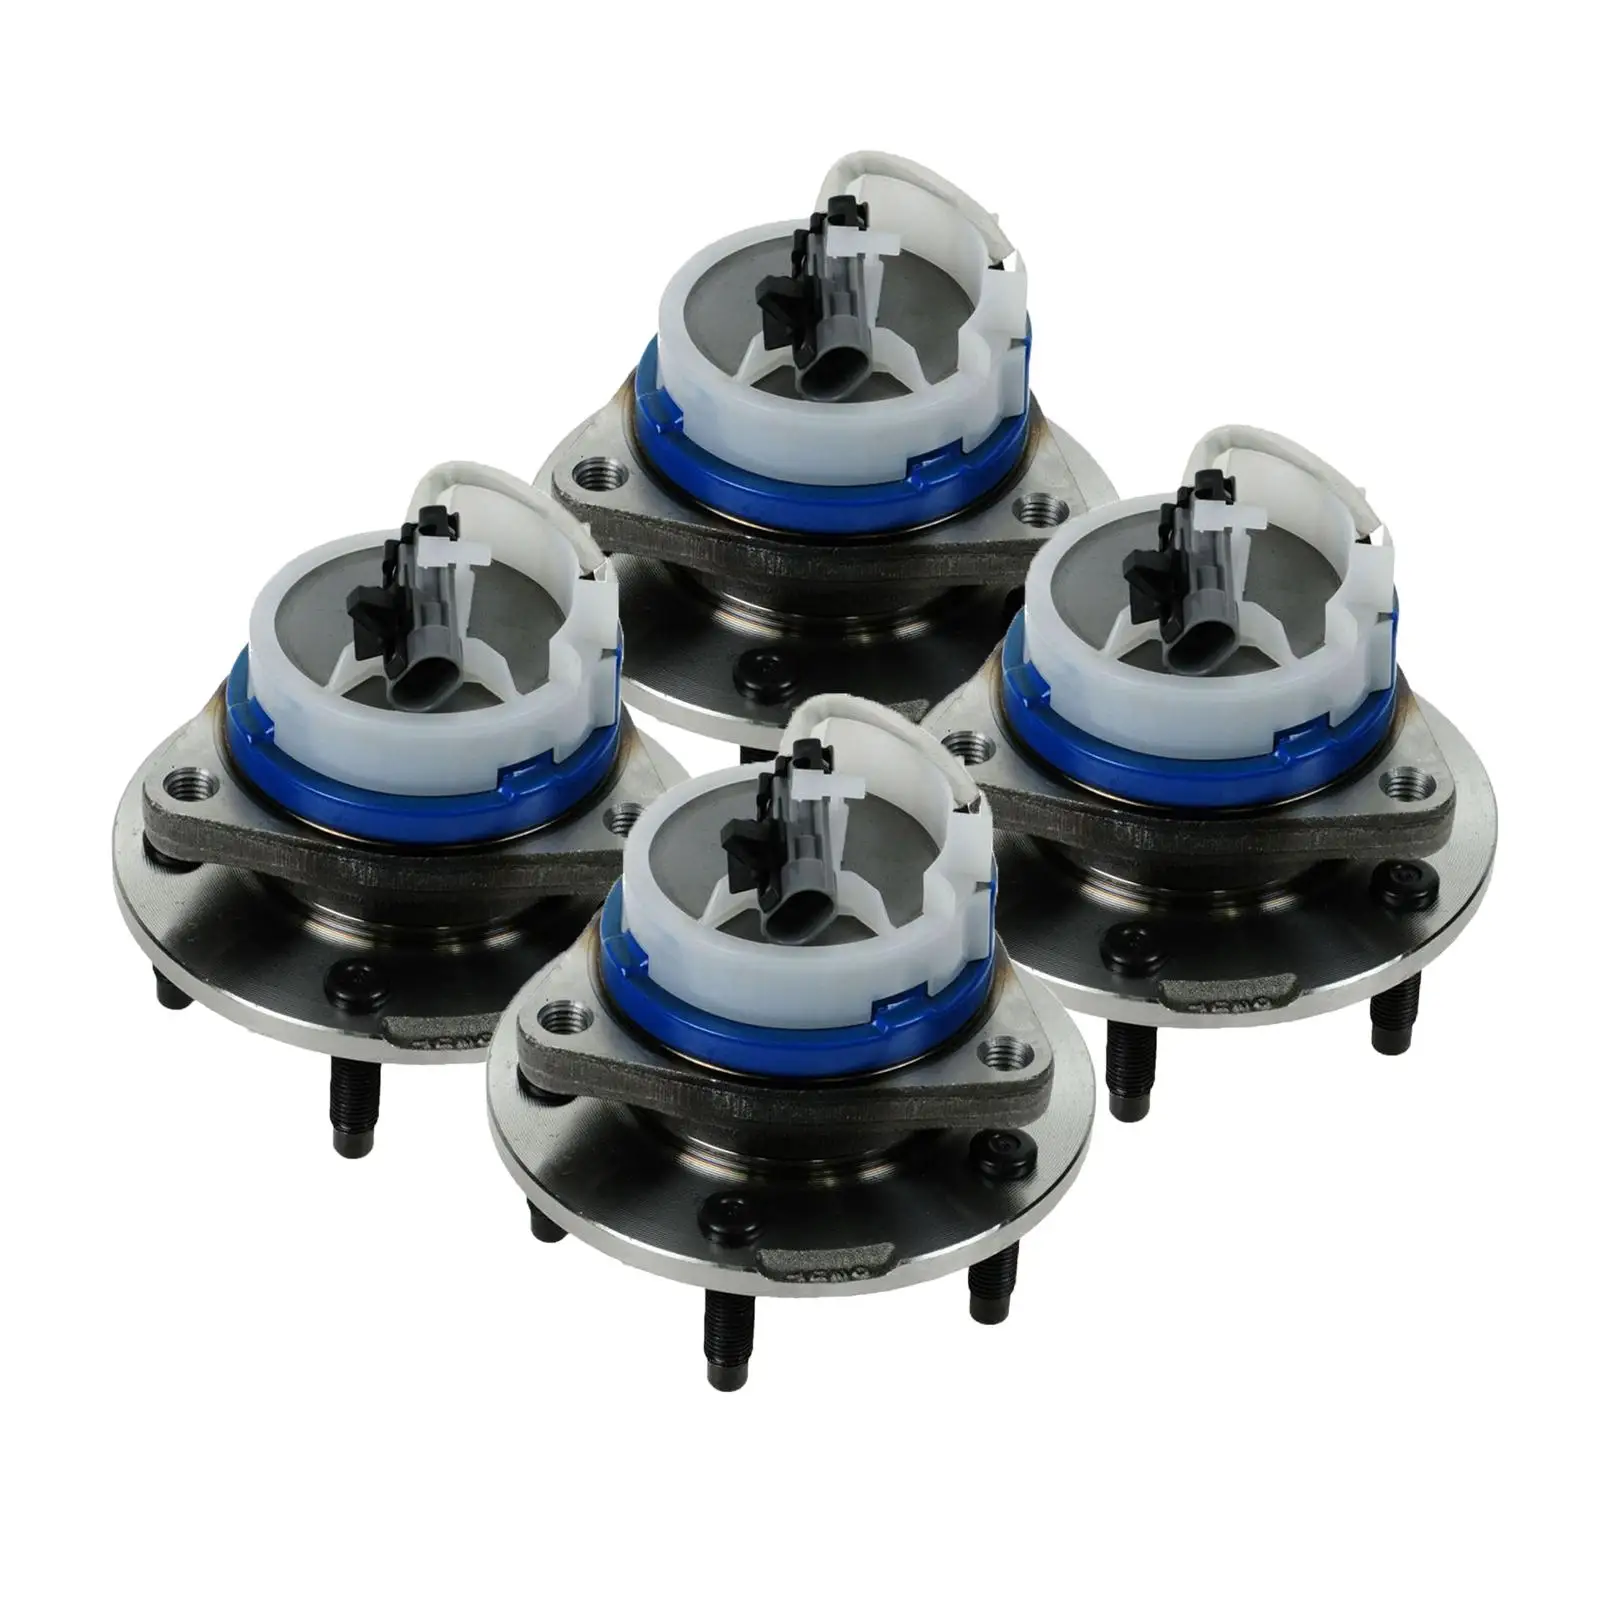 25693148 Replacement Car Accessories Wheel Hub Bearing Set for Cadillac Sts